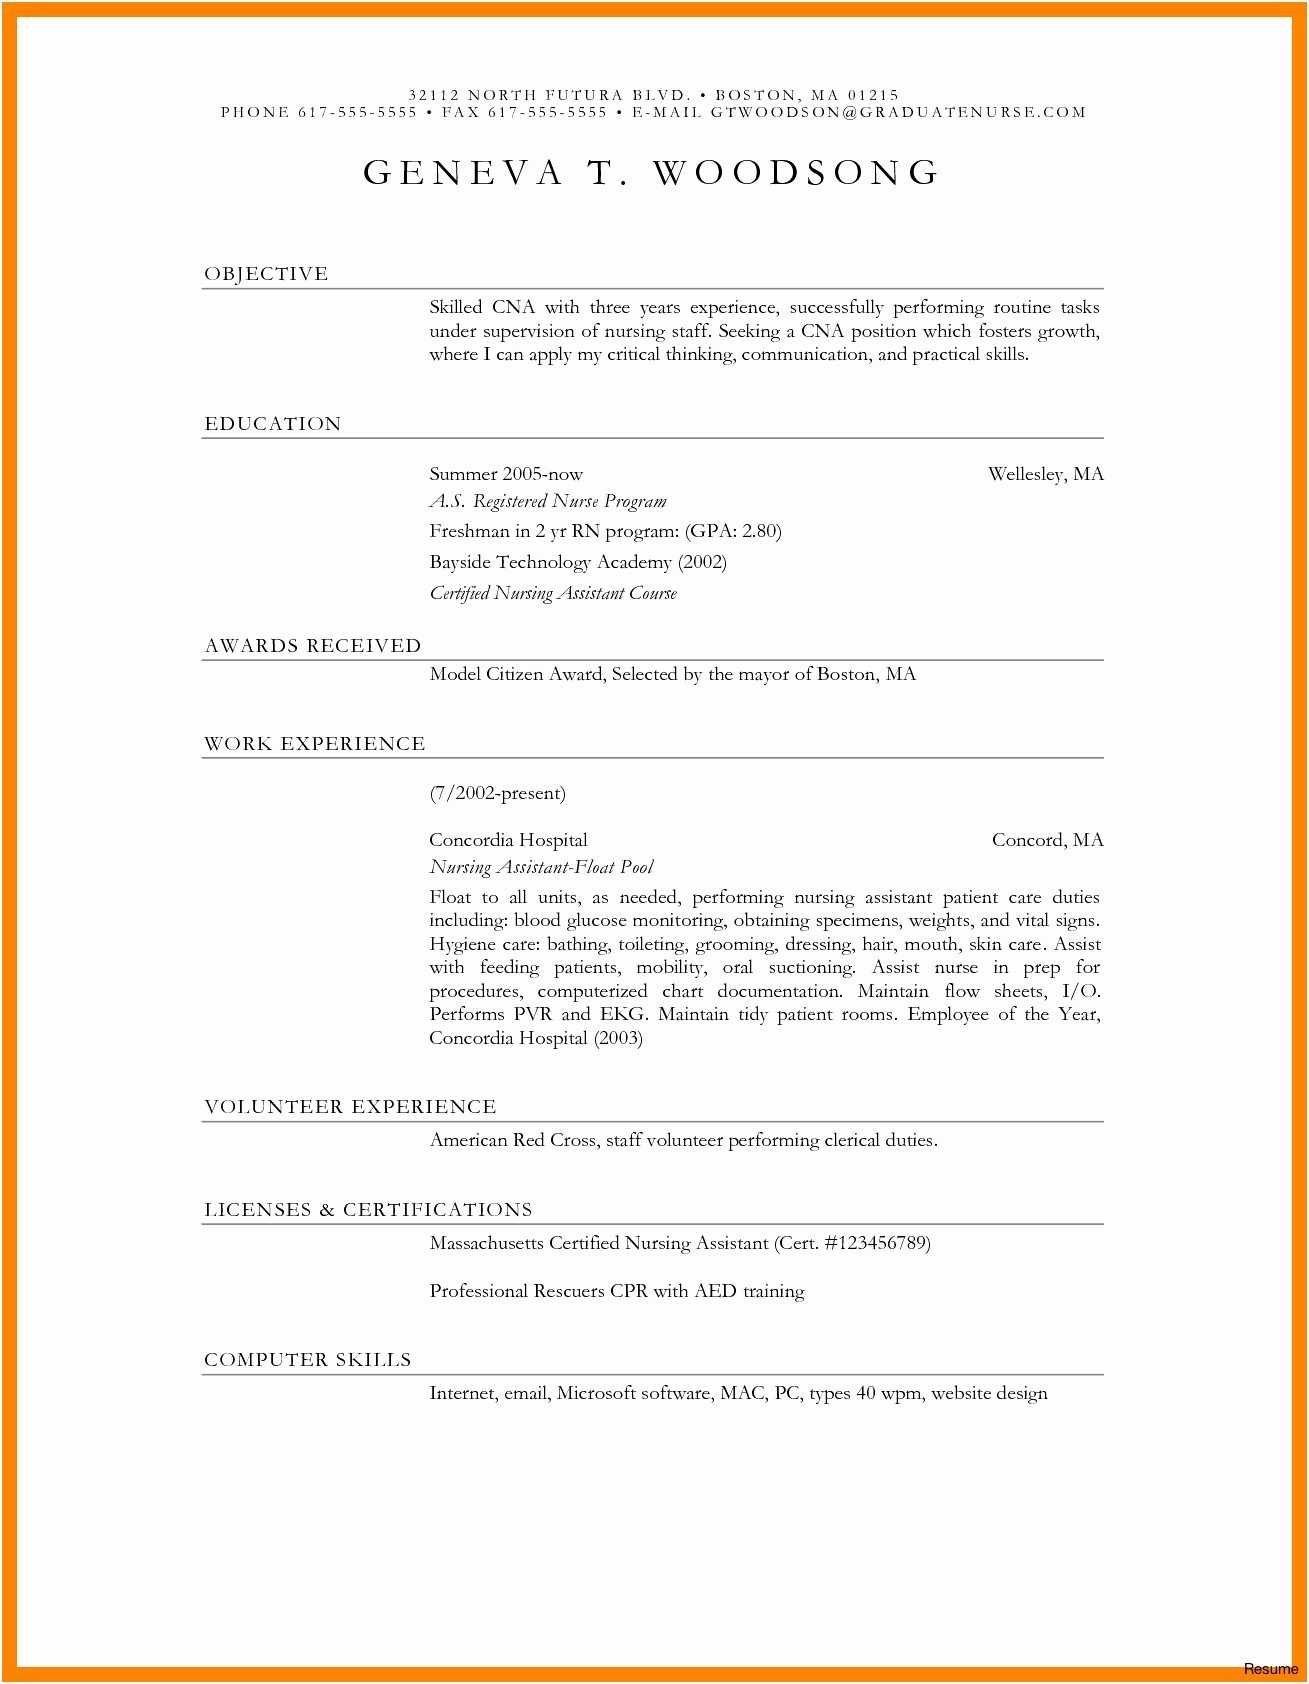 Fill In the Blank Resume Worksheet Also References Resume format Beautiful Fresh Blank Resume format